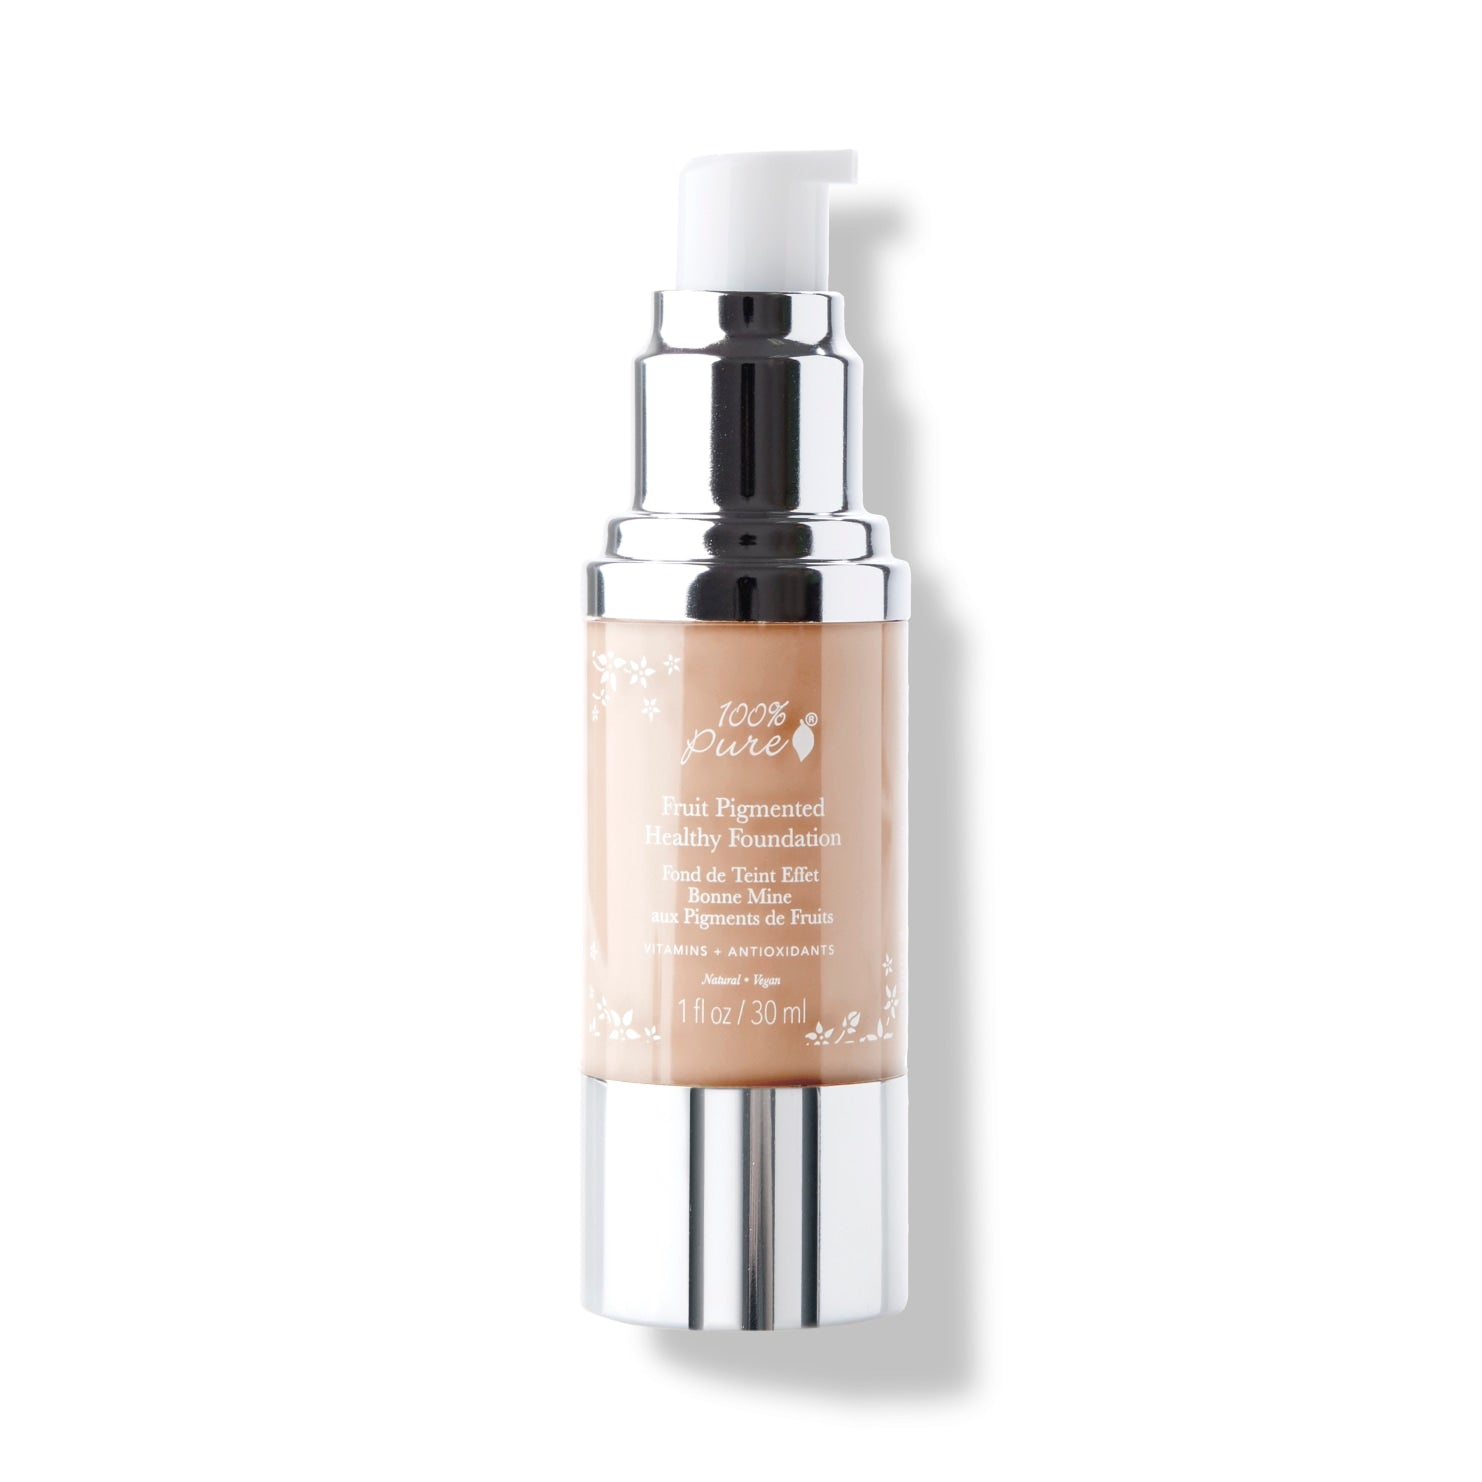 100% PURE® Fruit Pigmented® Healthy Foundation, Sand